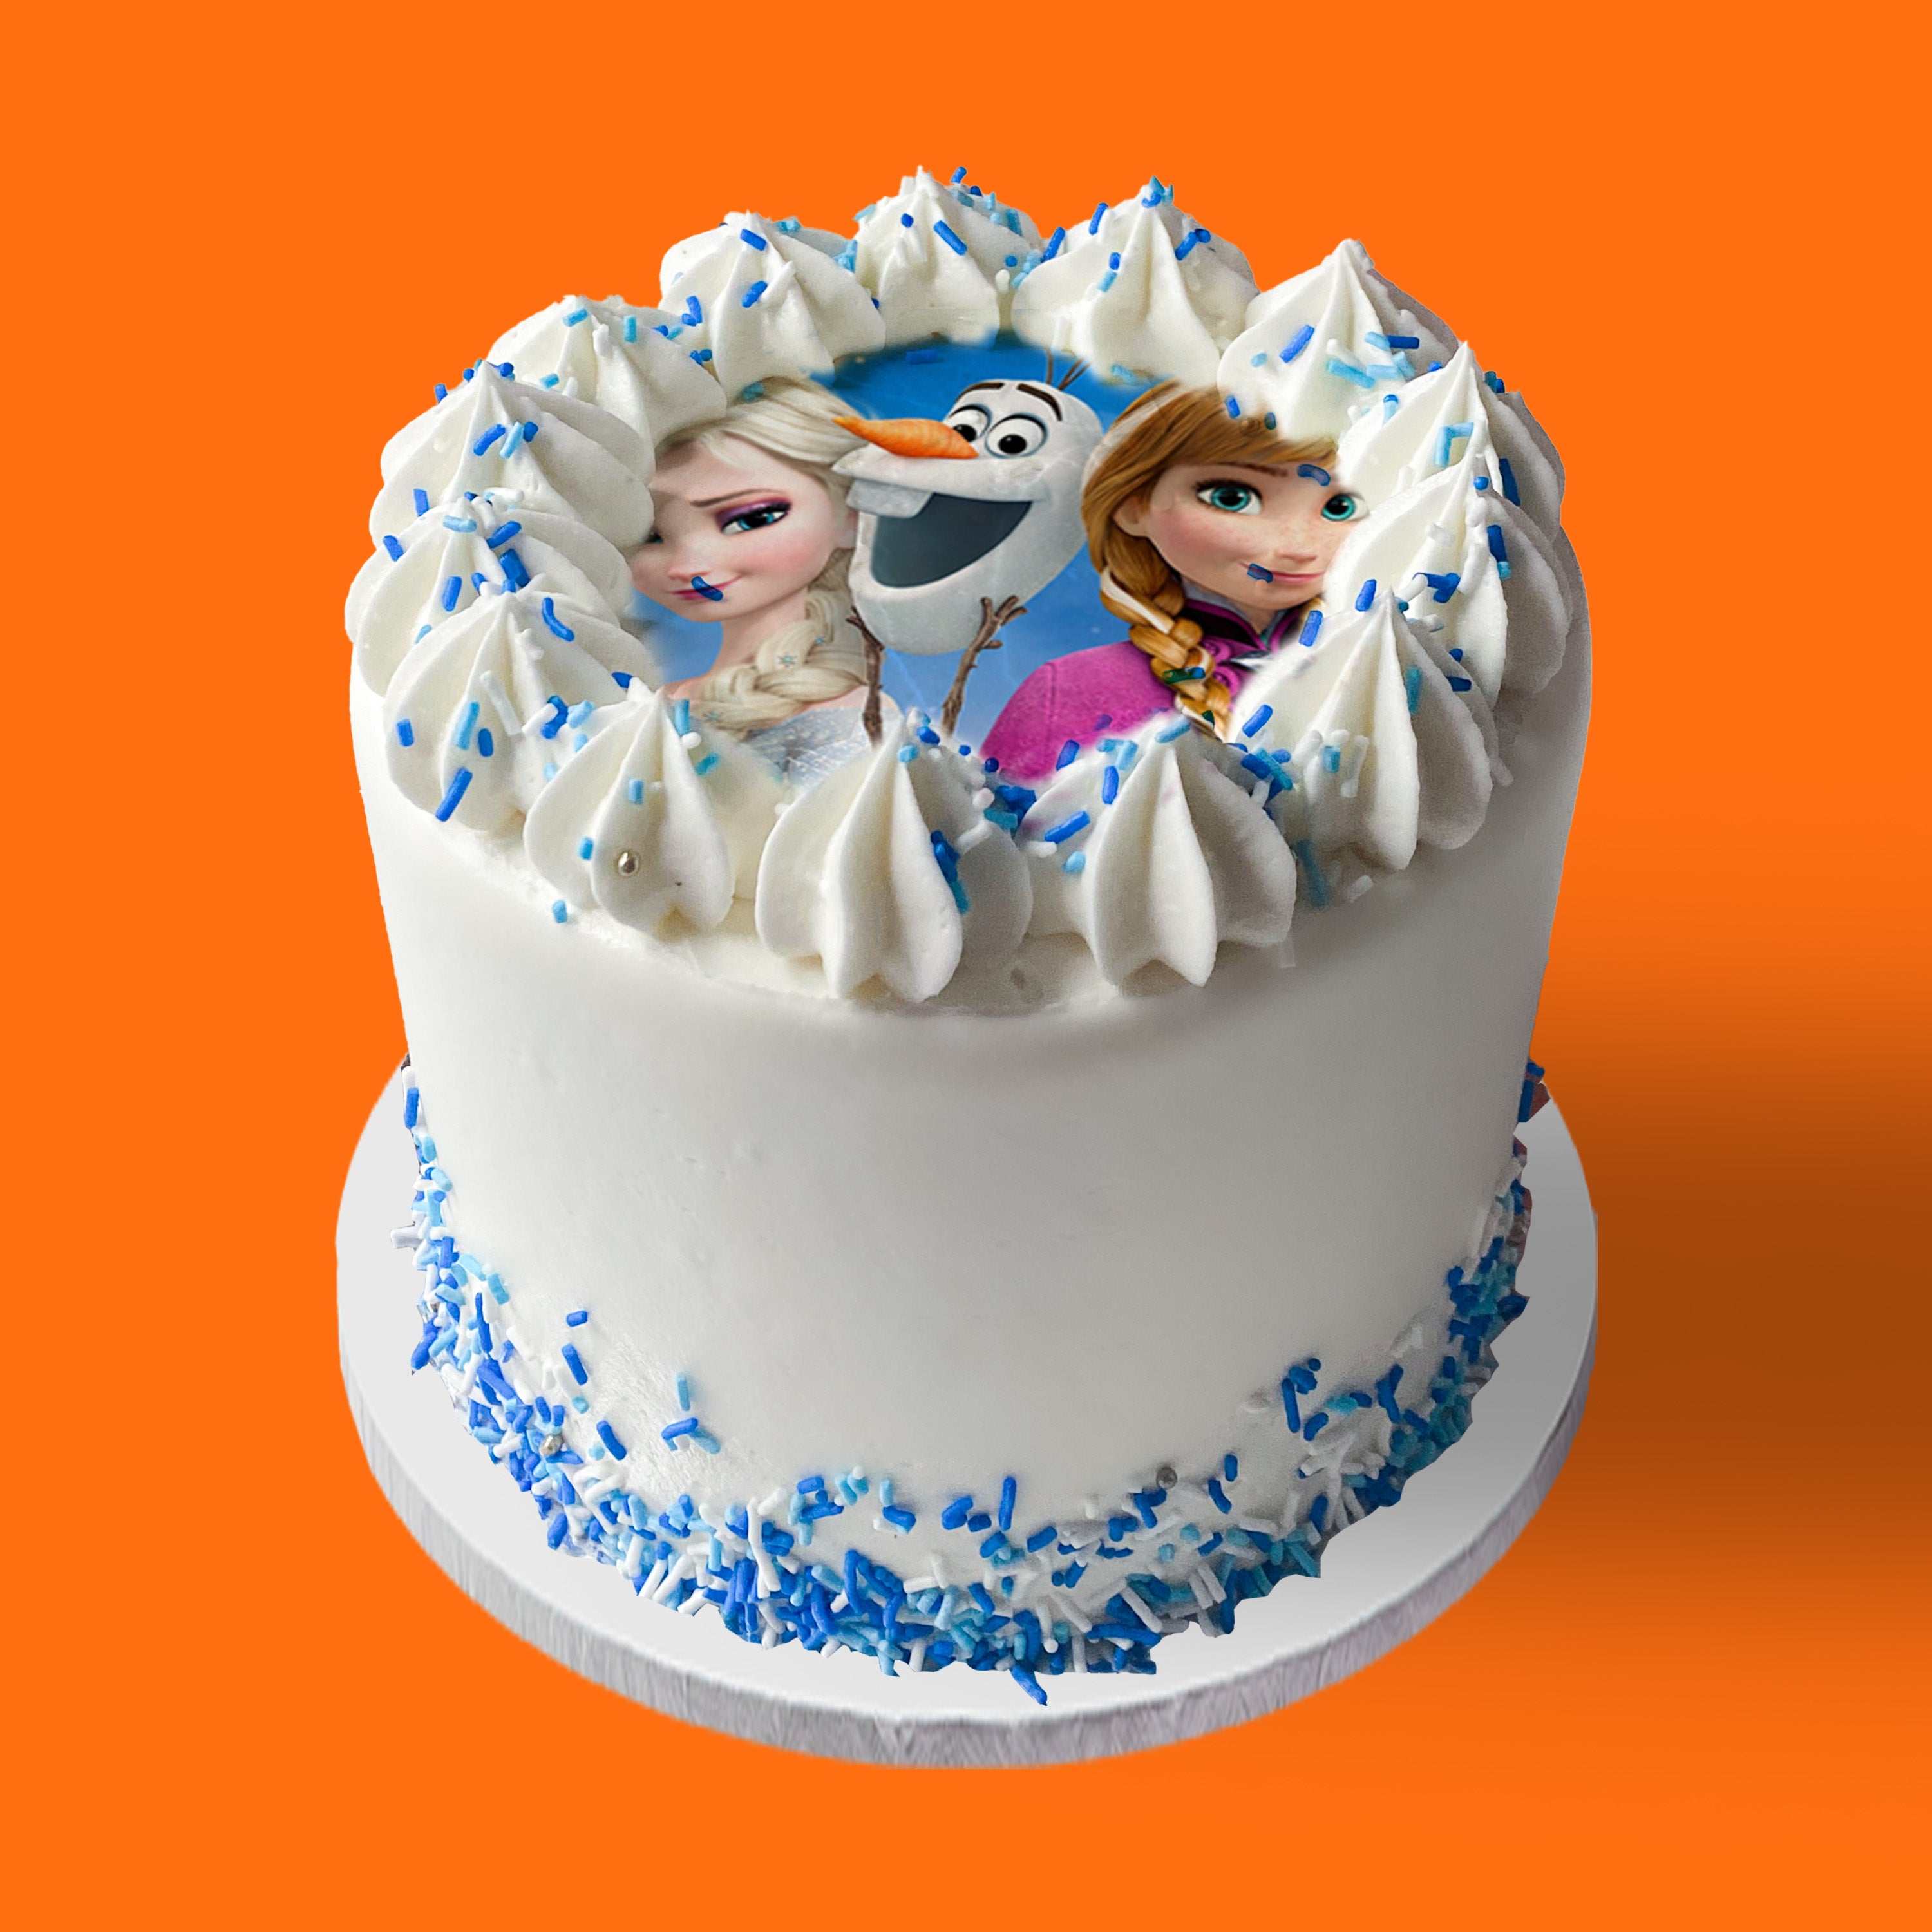 Frozen Birthday Cake - Buy Online, Free UK Delivery — New Cakes